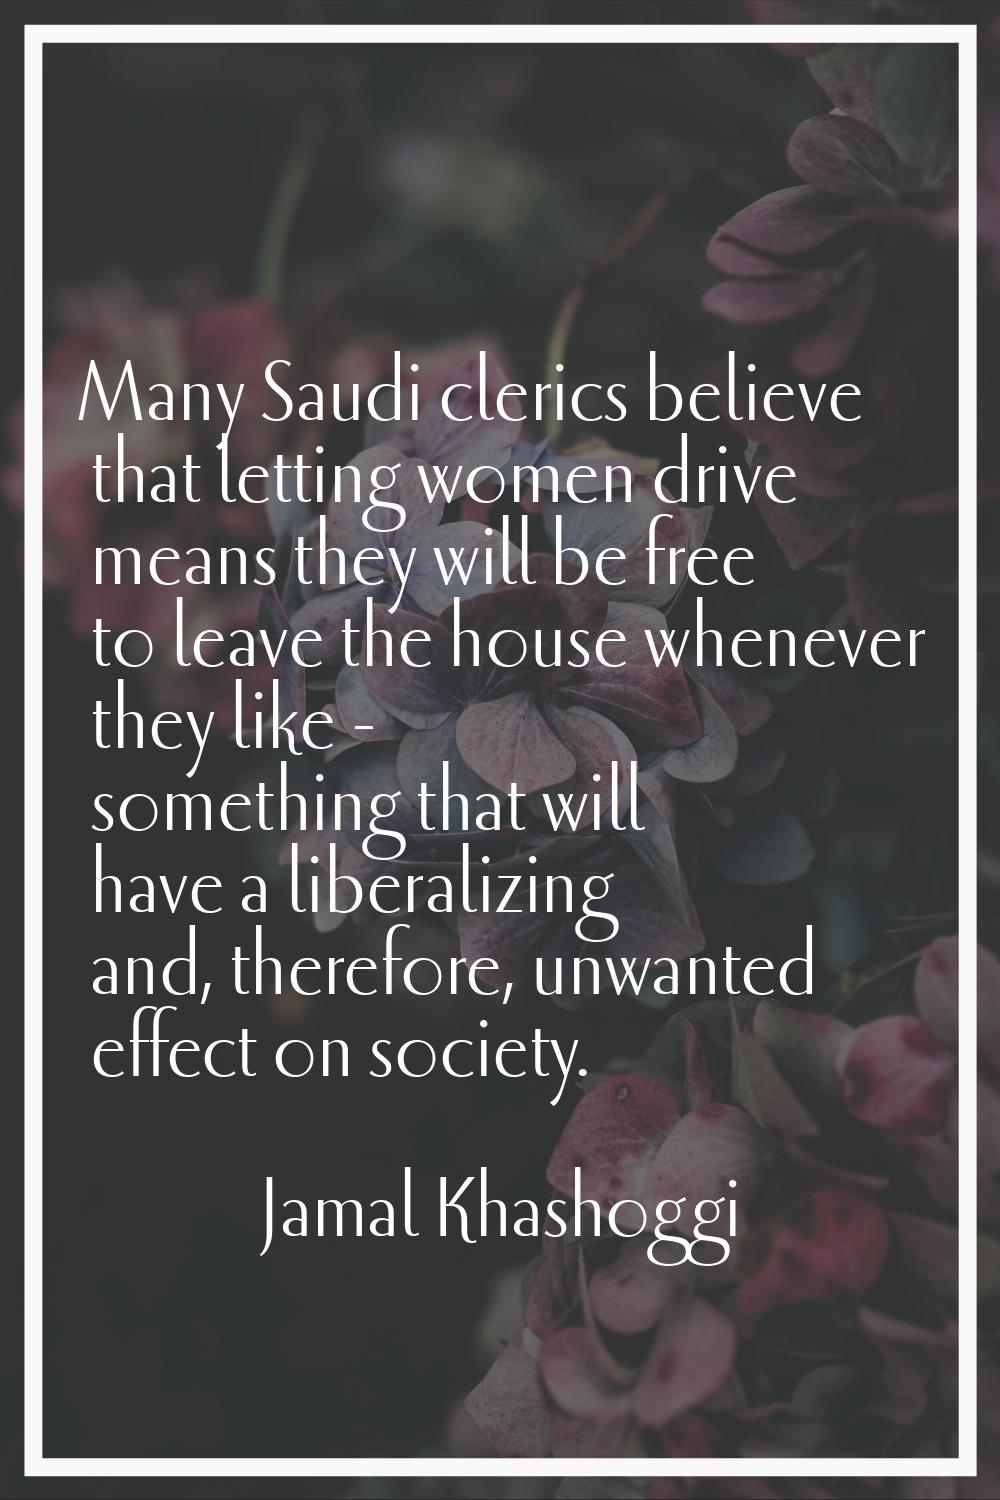 Many Saudi clerics believe that letting women drive means they will be free to leave the house when